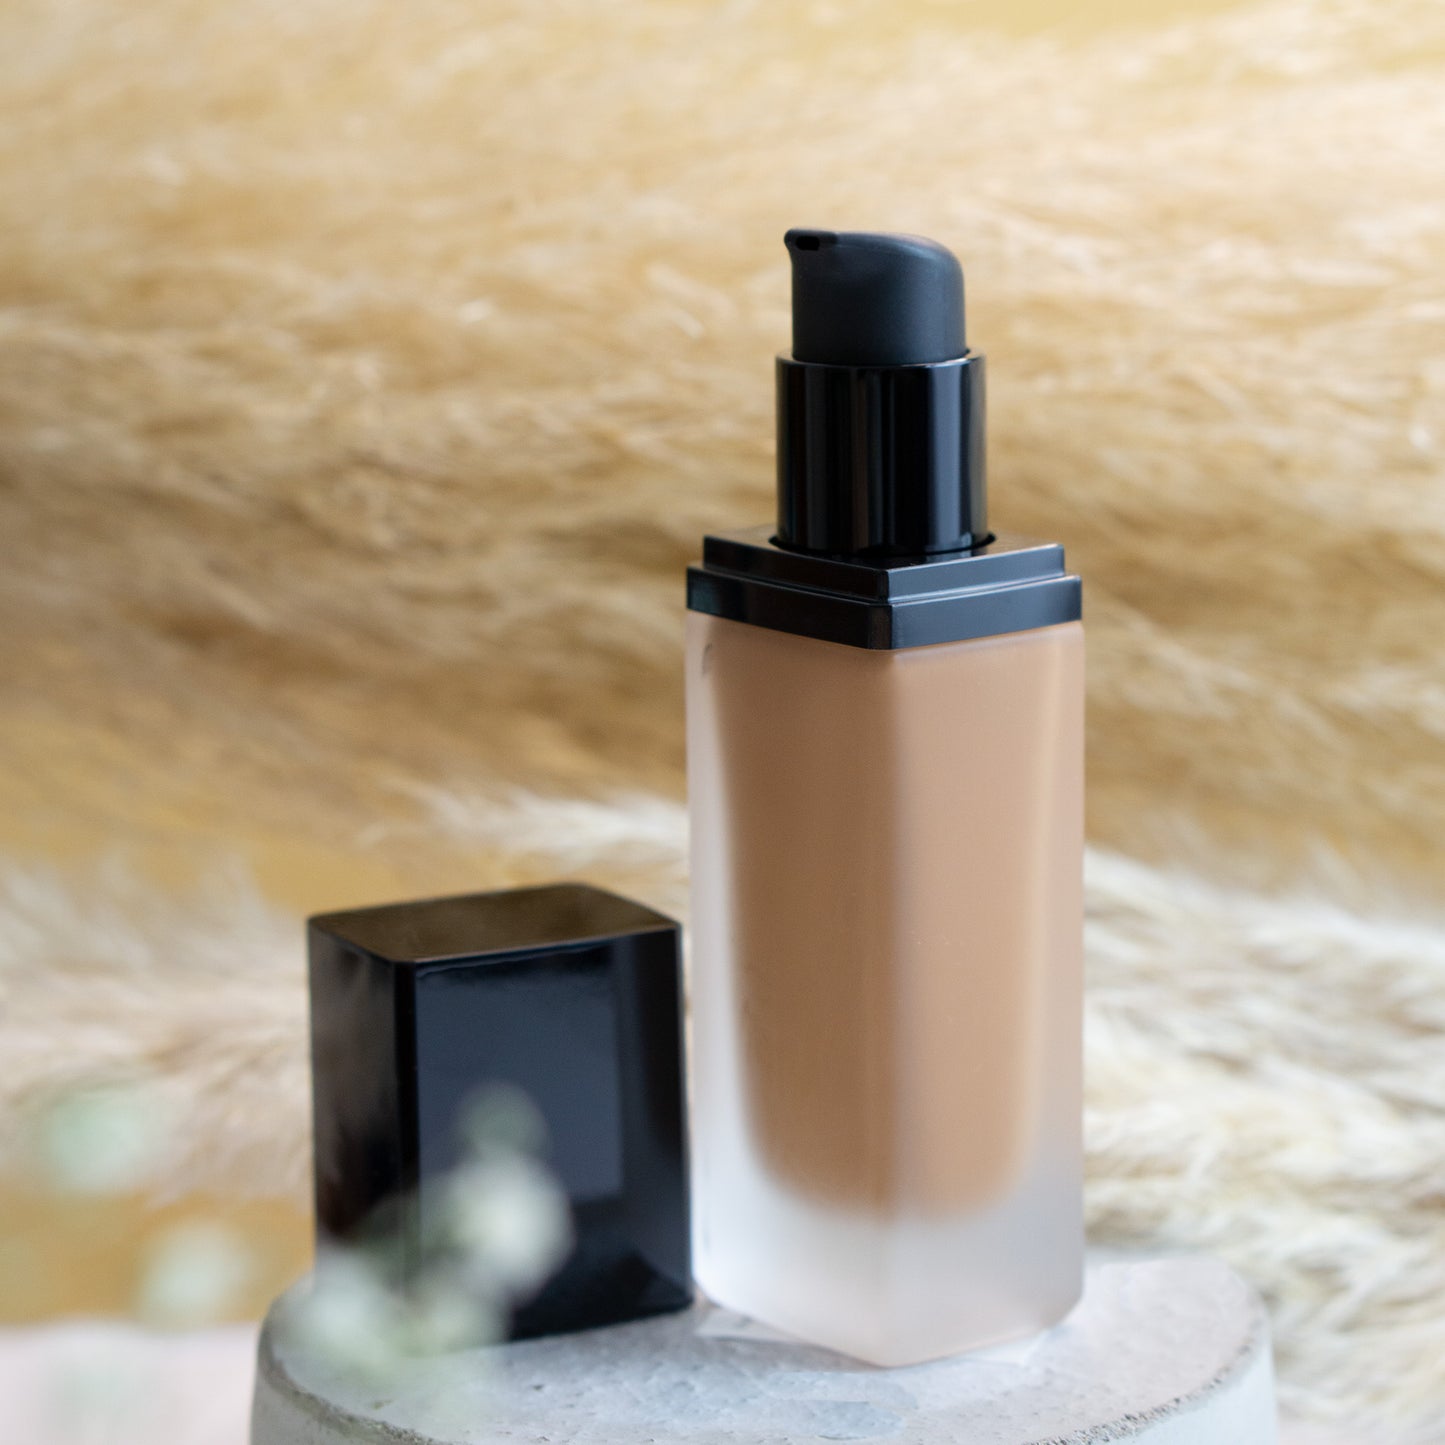 Natural finish with Cruisin Organics' Oak Foundation, featuring SPF 15 for added sun protection. This vegan and paraben-free foundation is the superb choice for a smooth, radiant complexion.